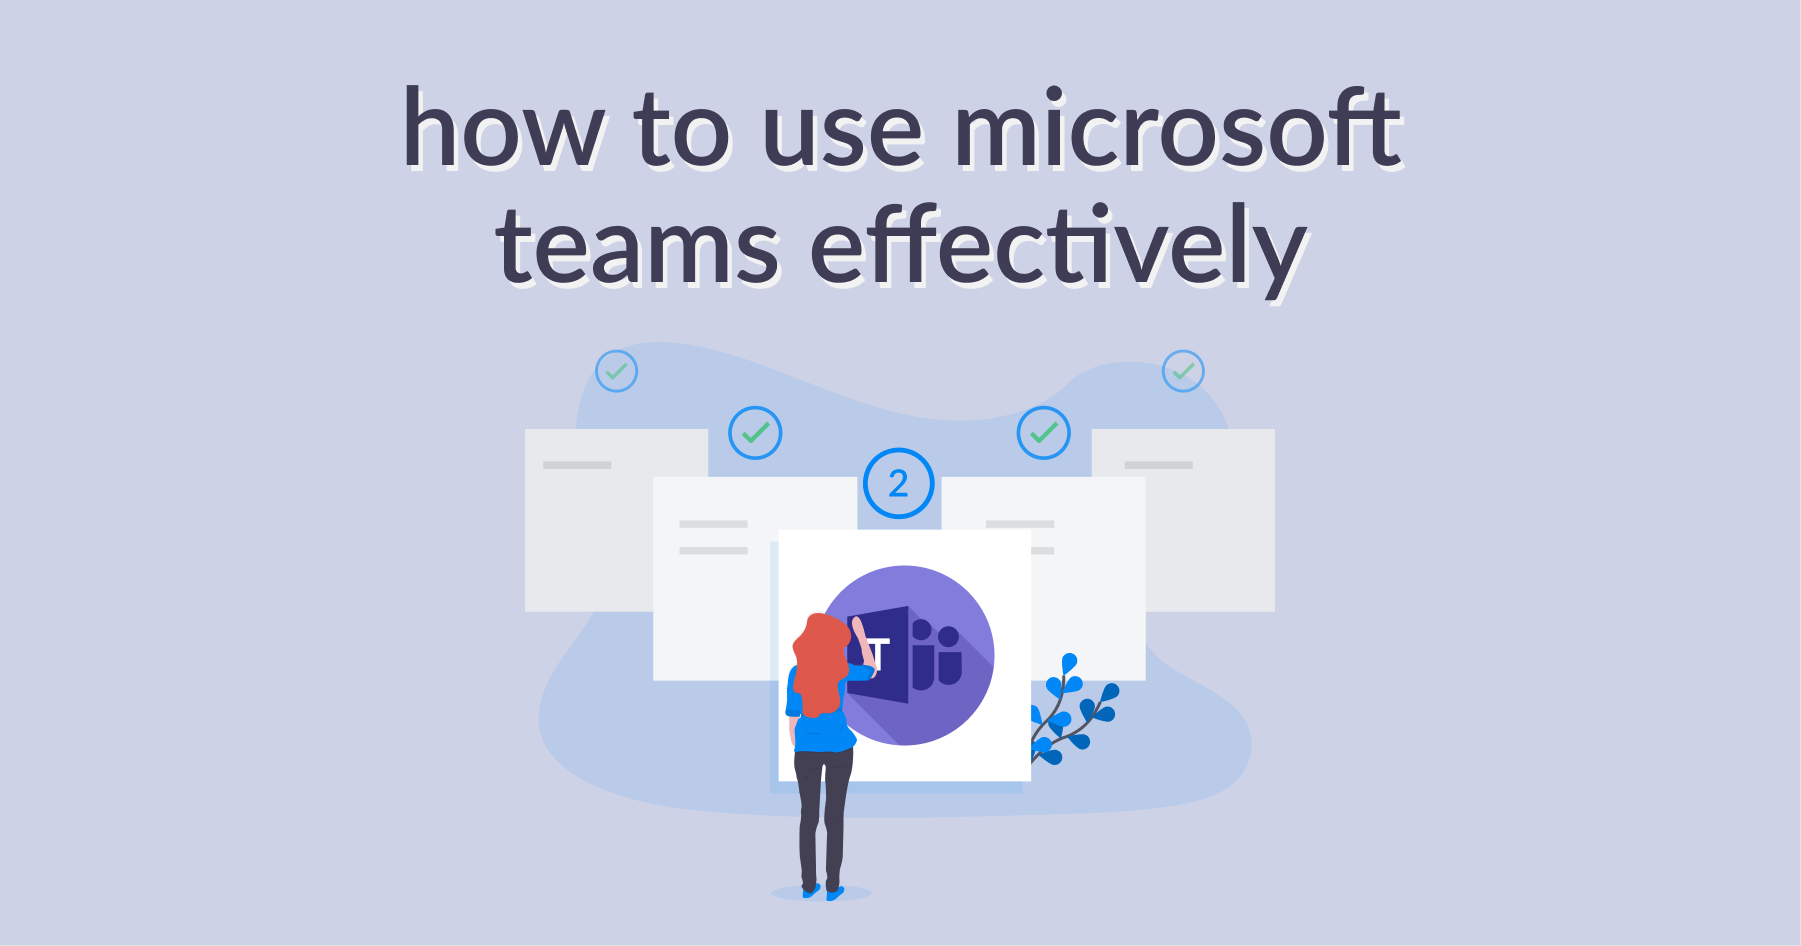 How to Use Microsoft Teams Effectively Guide 2: Setting Up Your Account